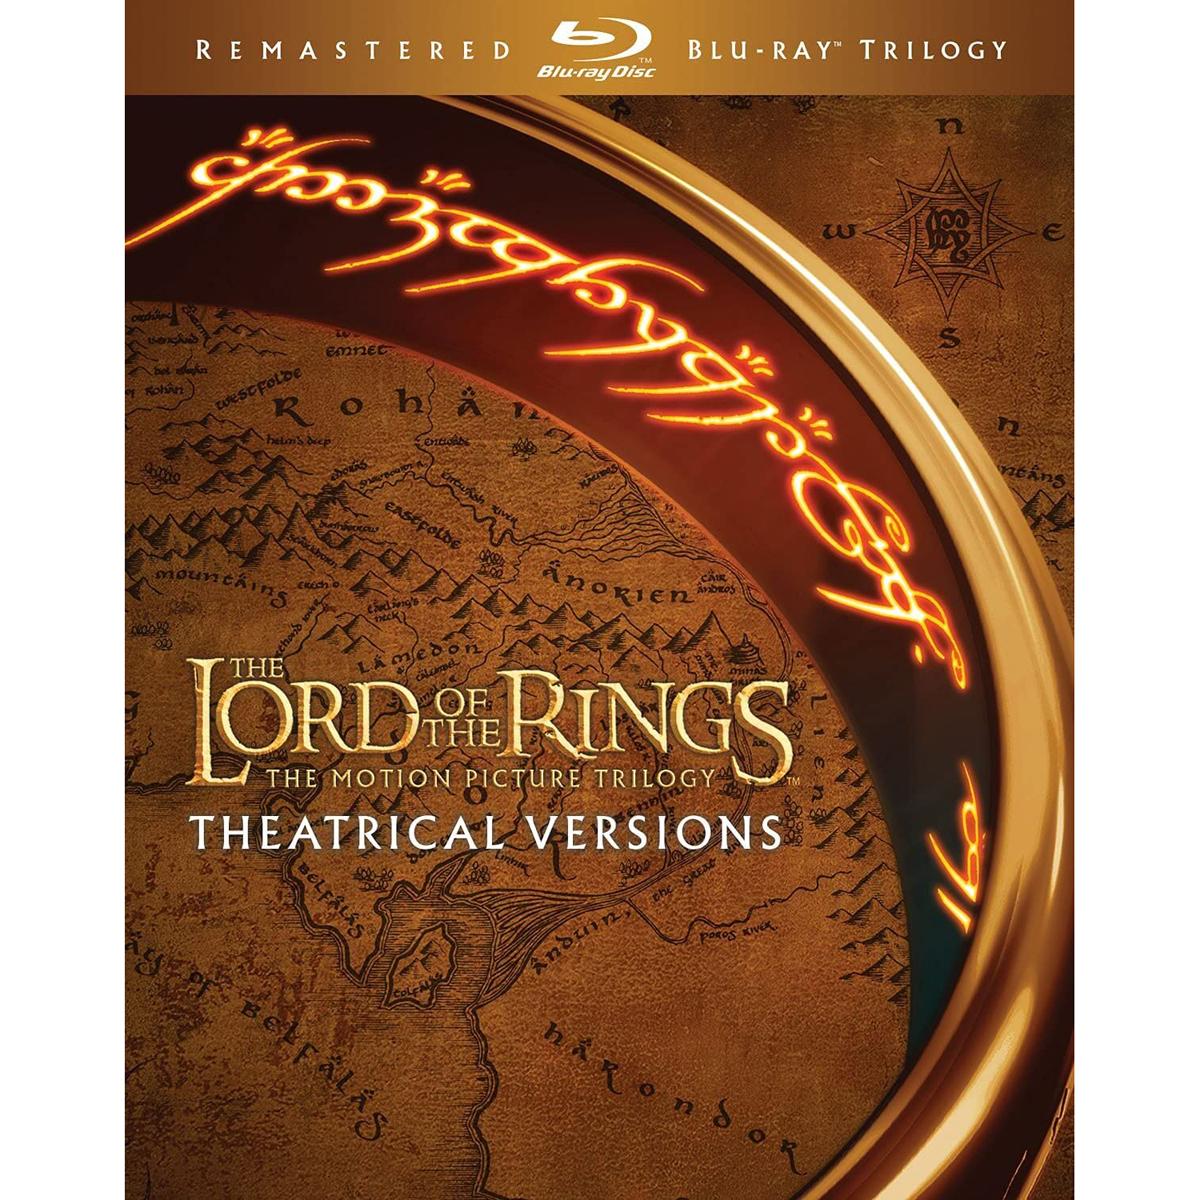 The Lord of the Rings Motion Picture Trilogy Blu-ray for $14.99